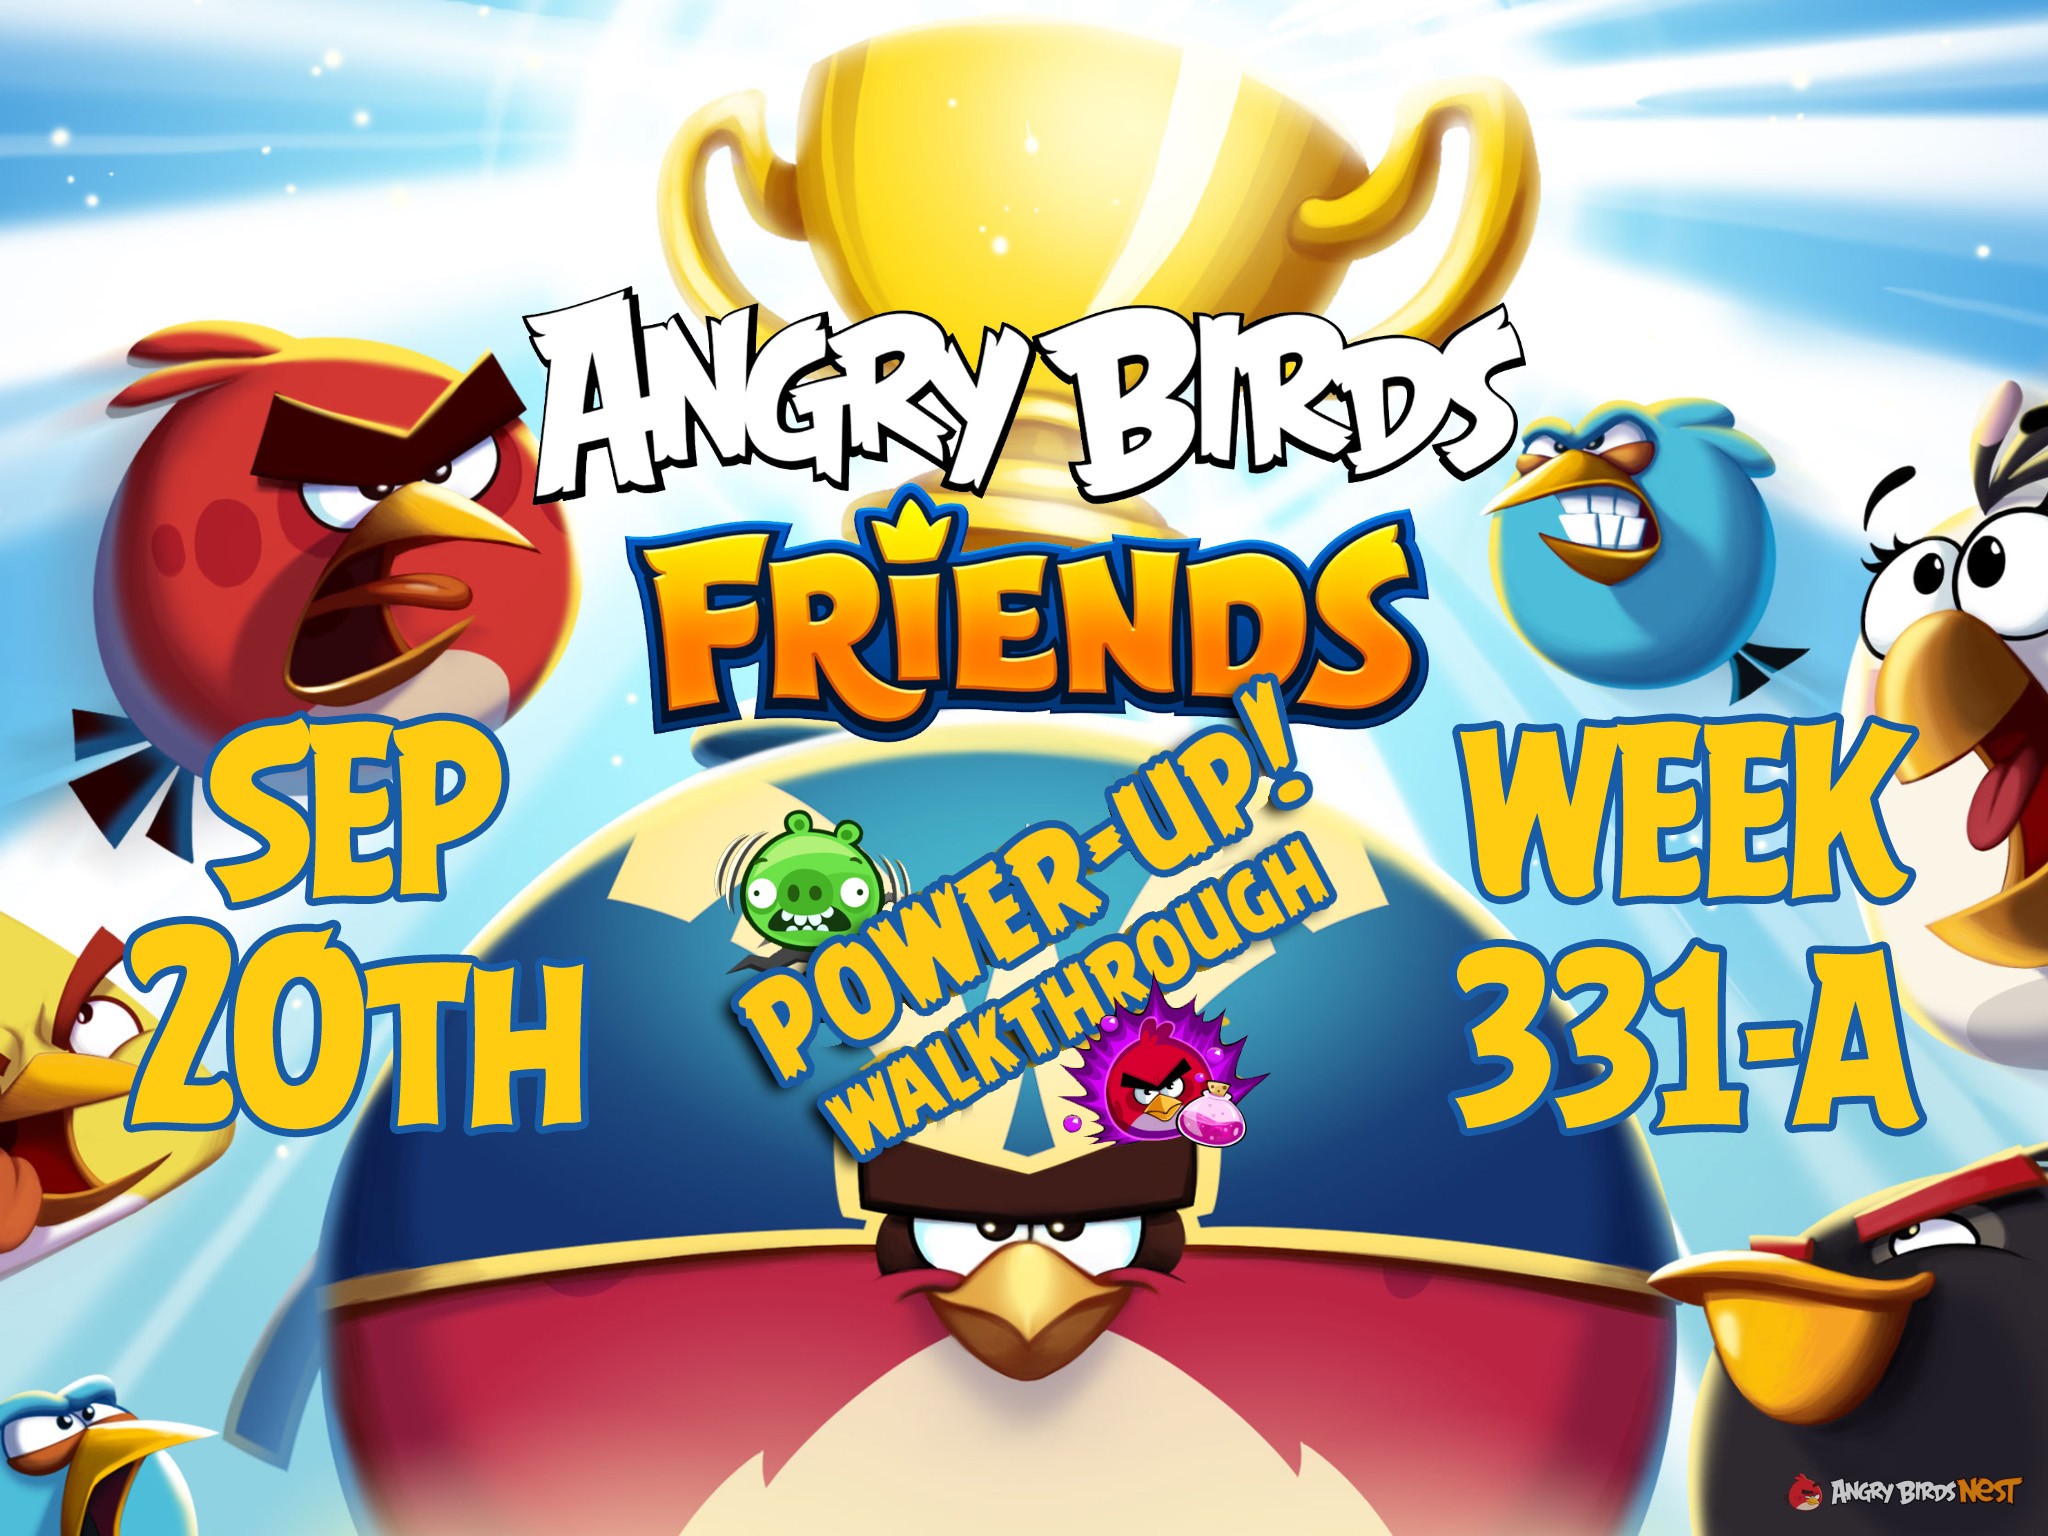 Angry-Birds-Friends-Tournament-Week-331-A-Feature-Image-PU